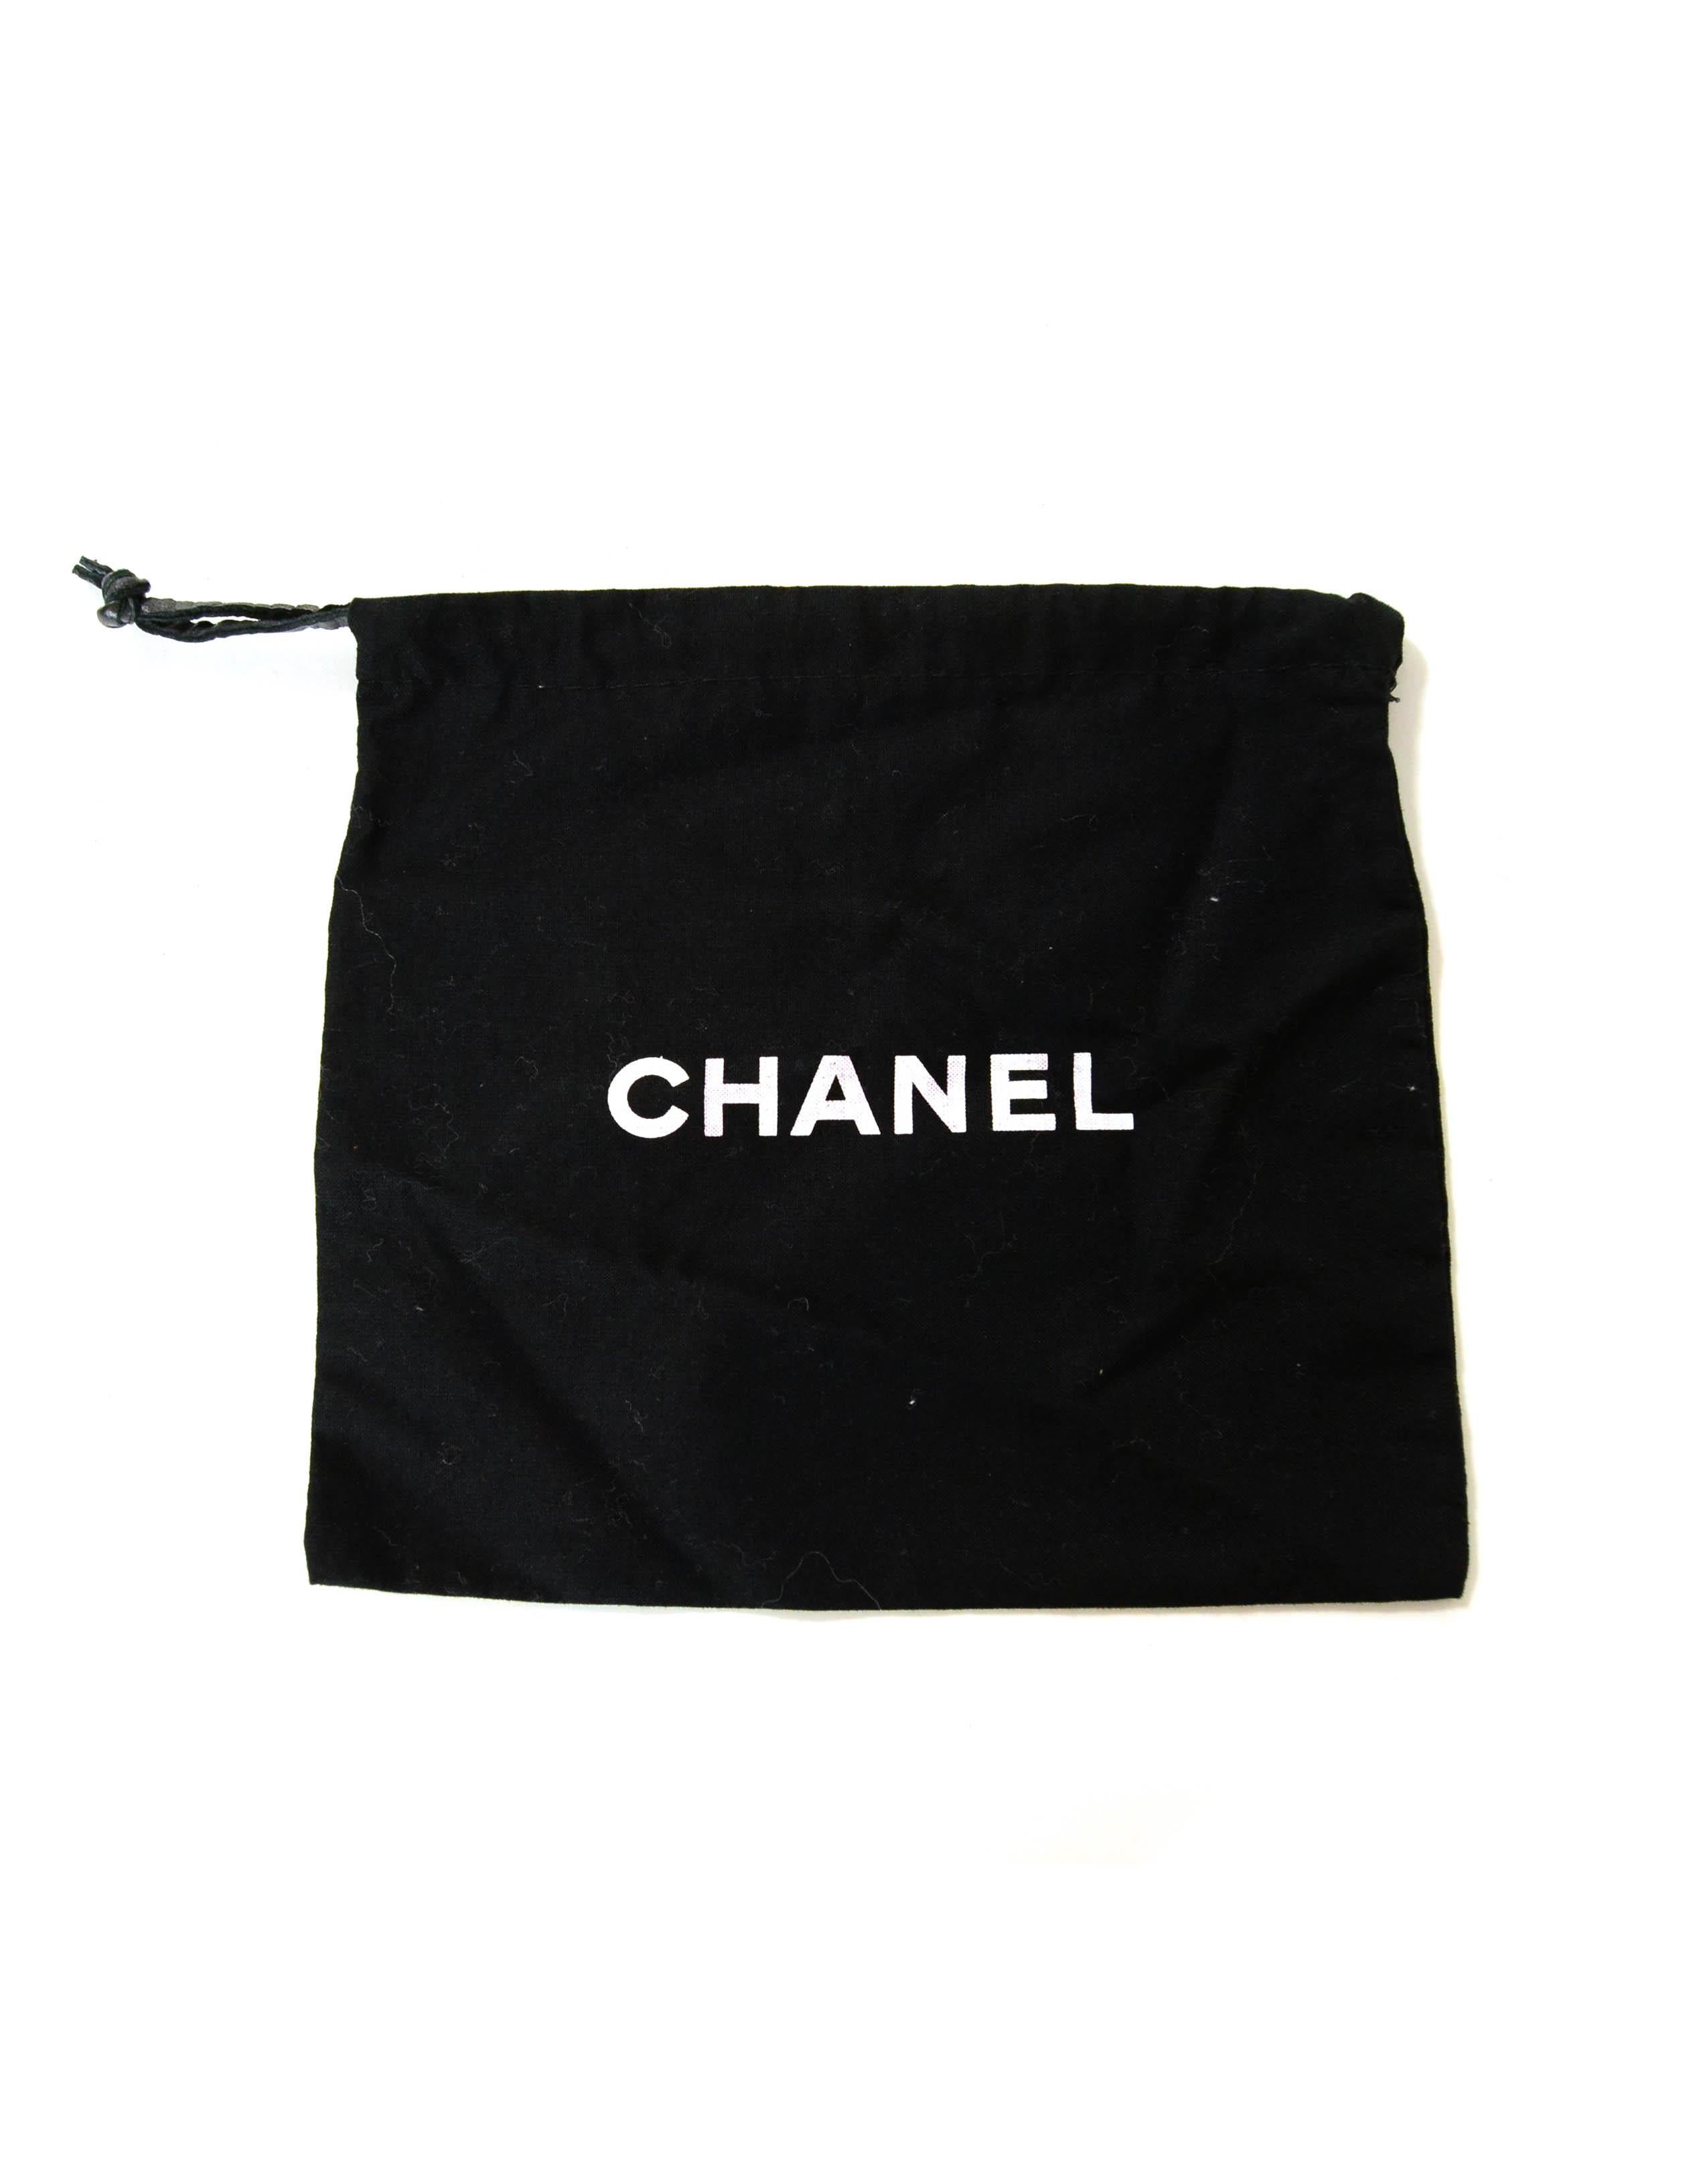 Chanel Vintage Black Leather Quilted Checkbook Cover/Wallet 4